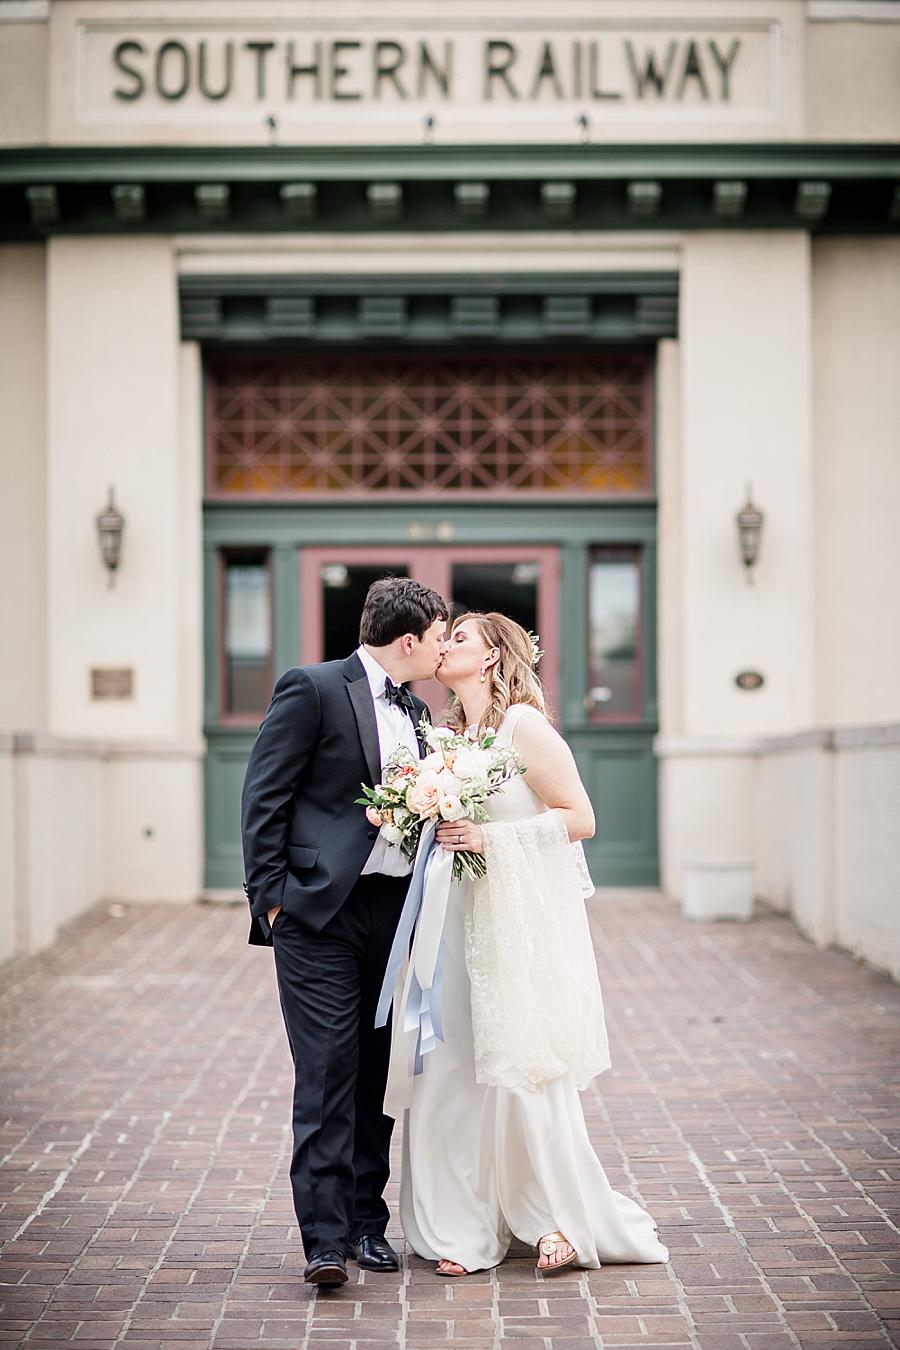 Southern Railway at this Southern Railway Station Wedding by Knoxville Wedding Photographer, Amanda May Photos.